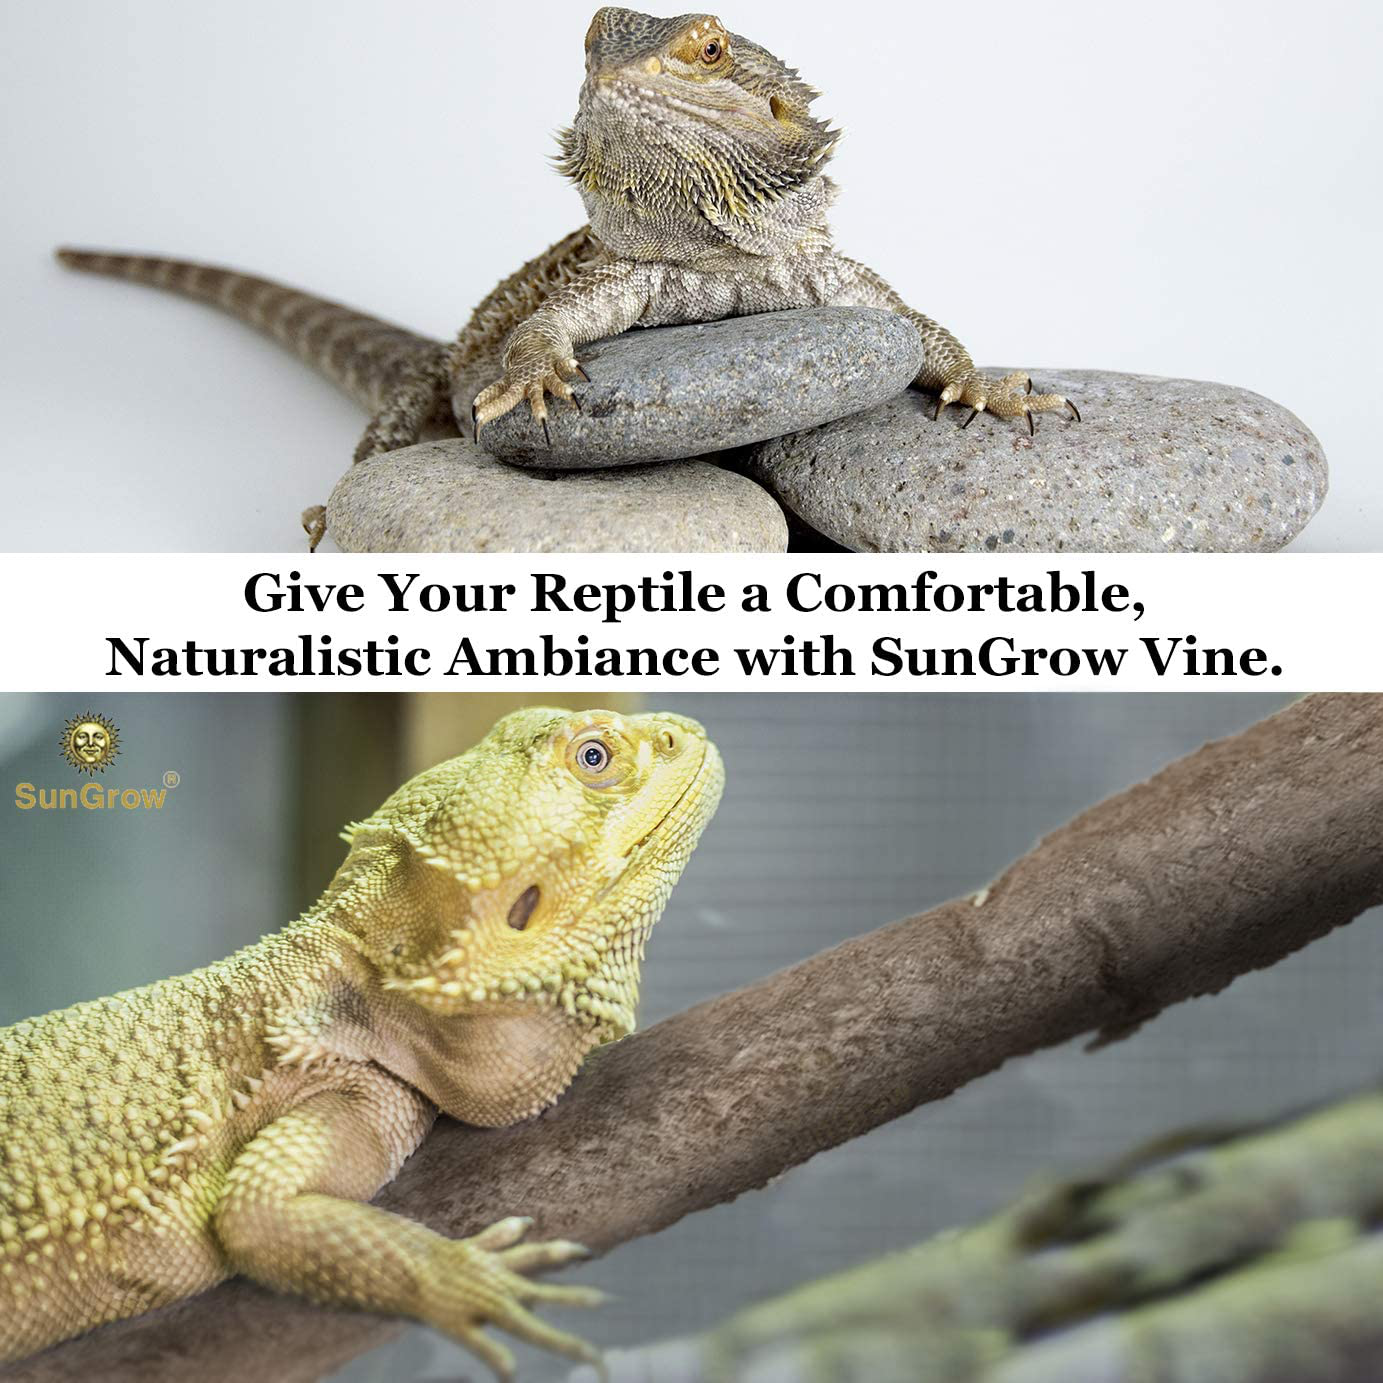 Sungrow Animal Vine, 6 Feet Long, Twistable Branch, Creates Realistic Habitat for Reptiles and Amphibians, Décor and Climbing Toy for Chameleons, Tree Frogs and Geckos, Includes 5 Suction Cups